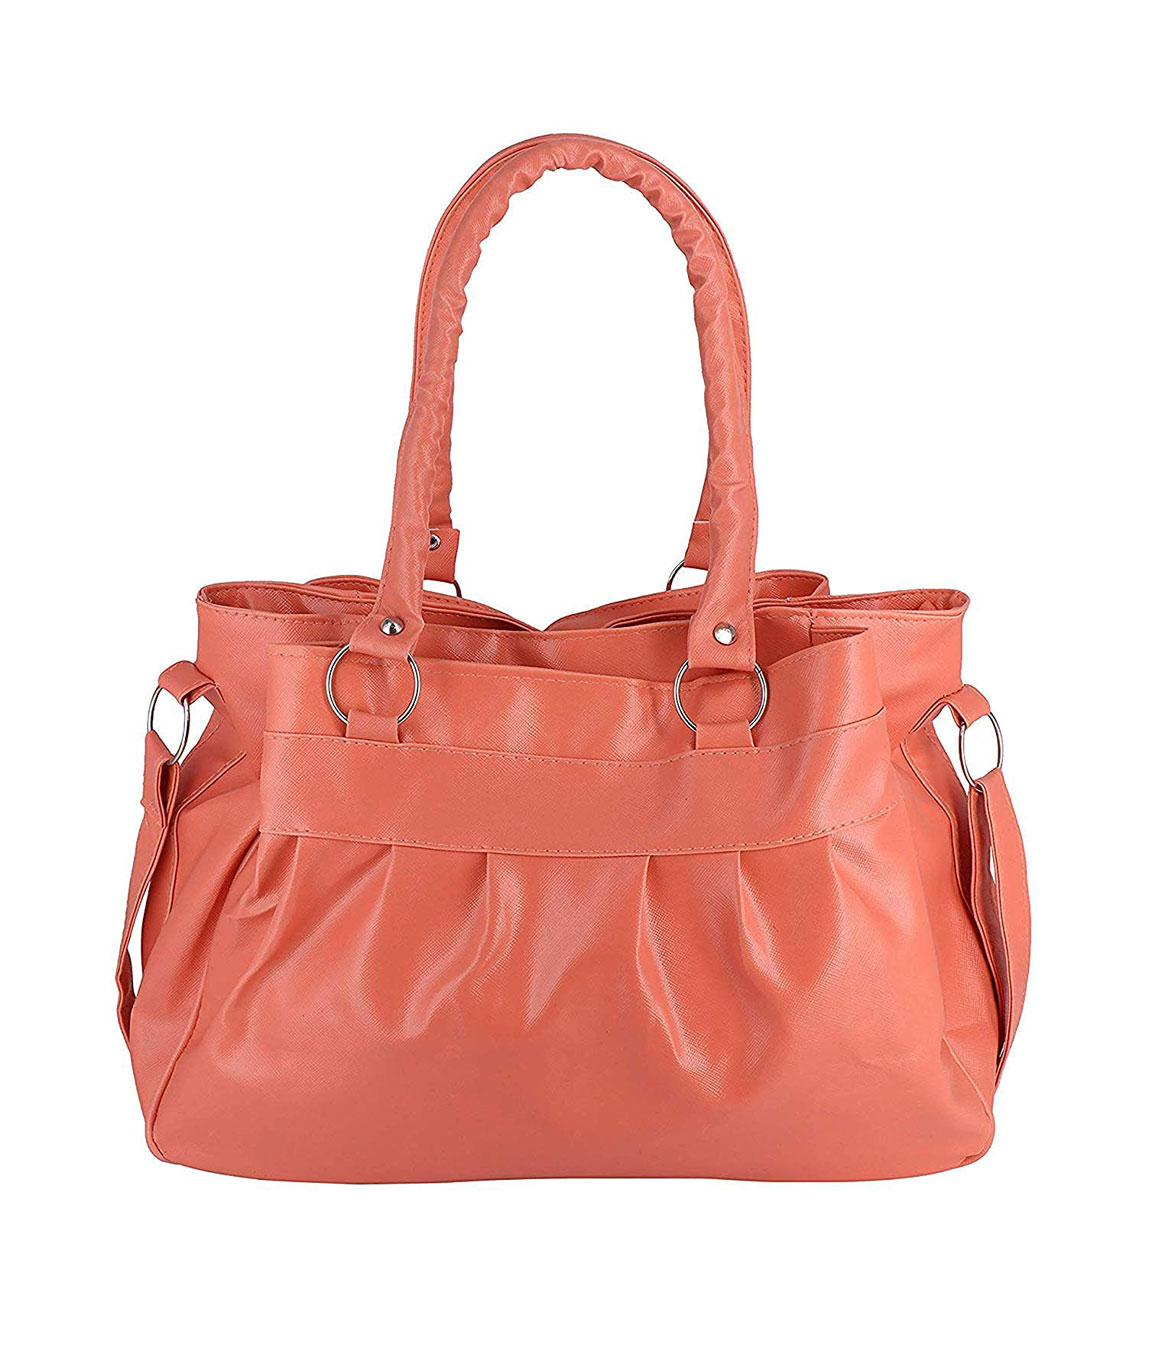 WD4990) Office Bags For Ladies Fashion Bags New Bag Style